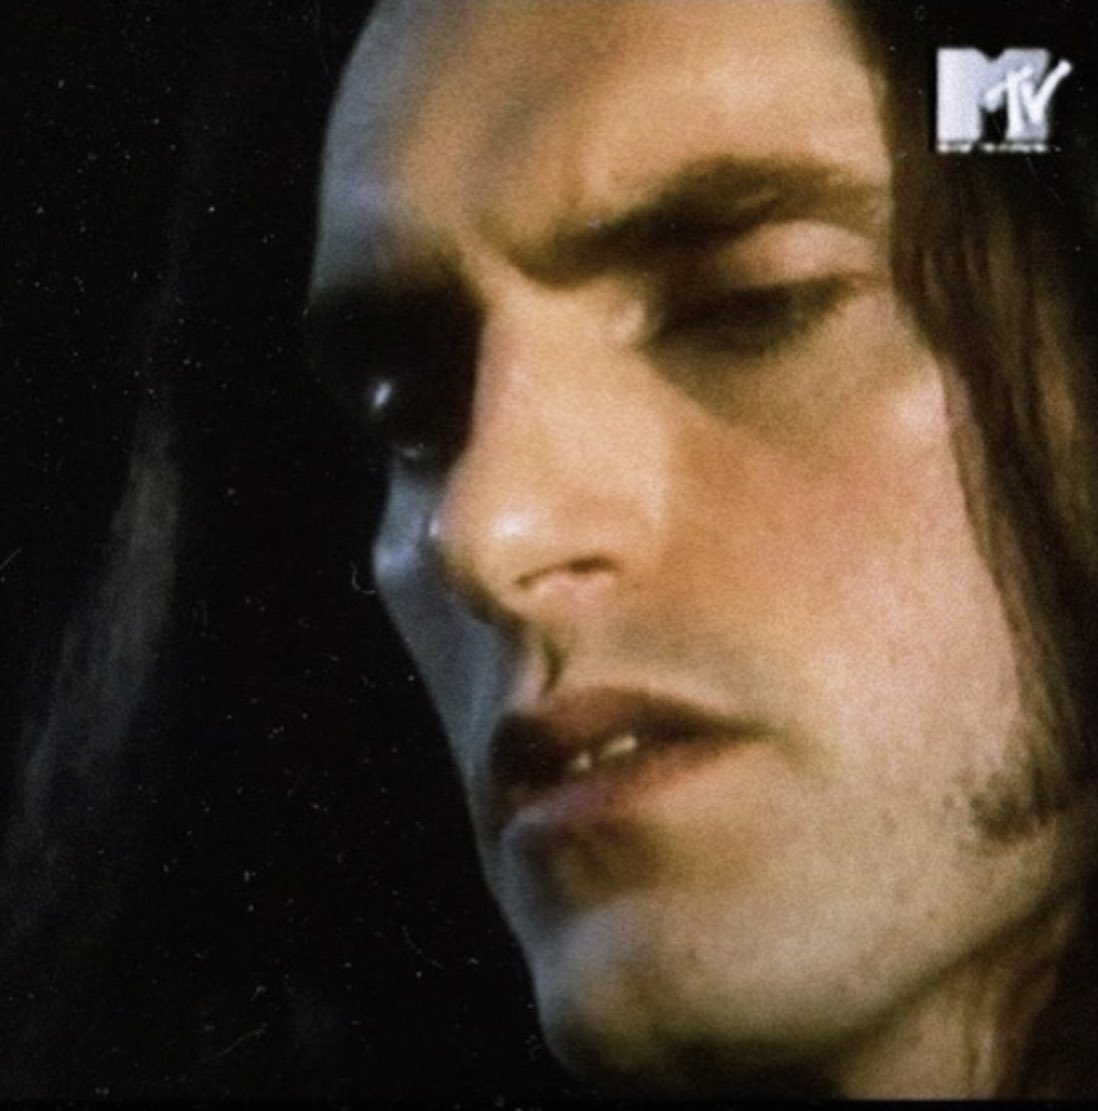 peter steele for MTV 1995